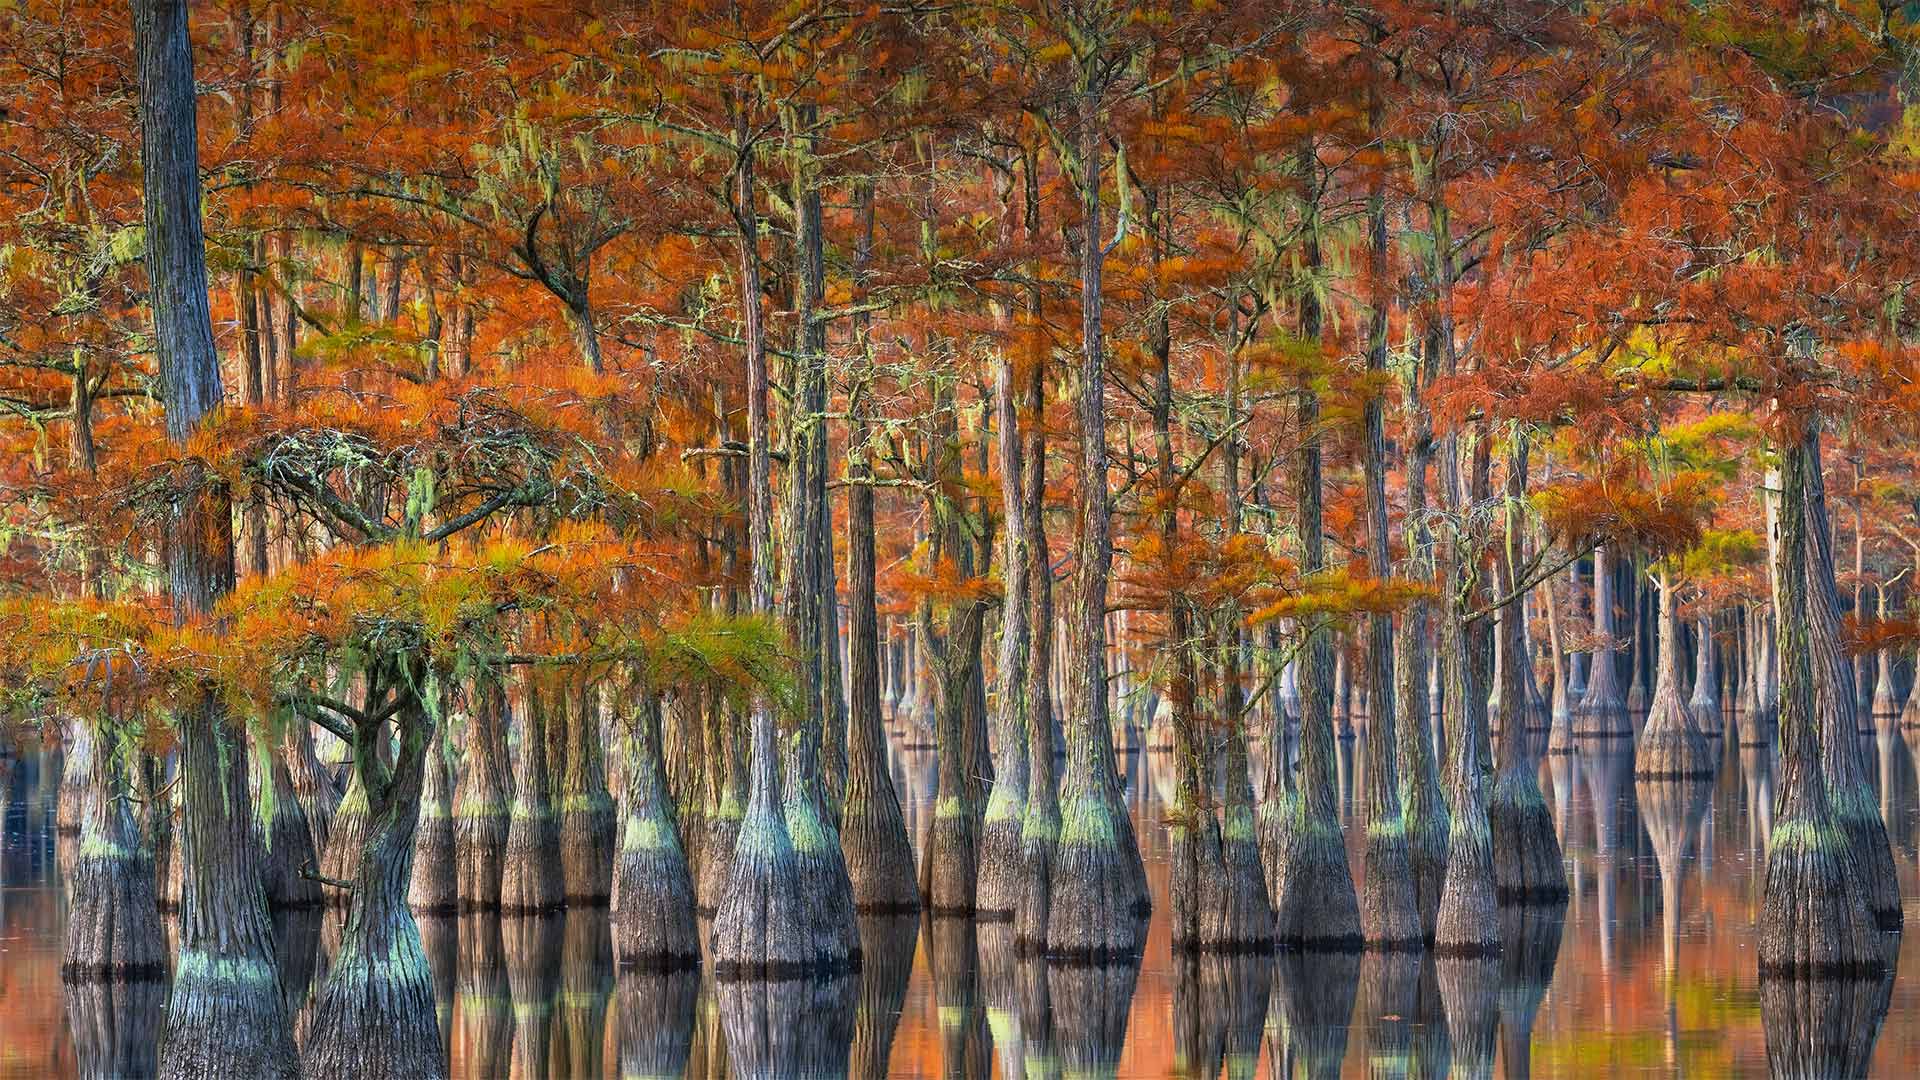 Cypress trees in autumn